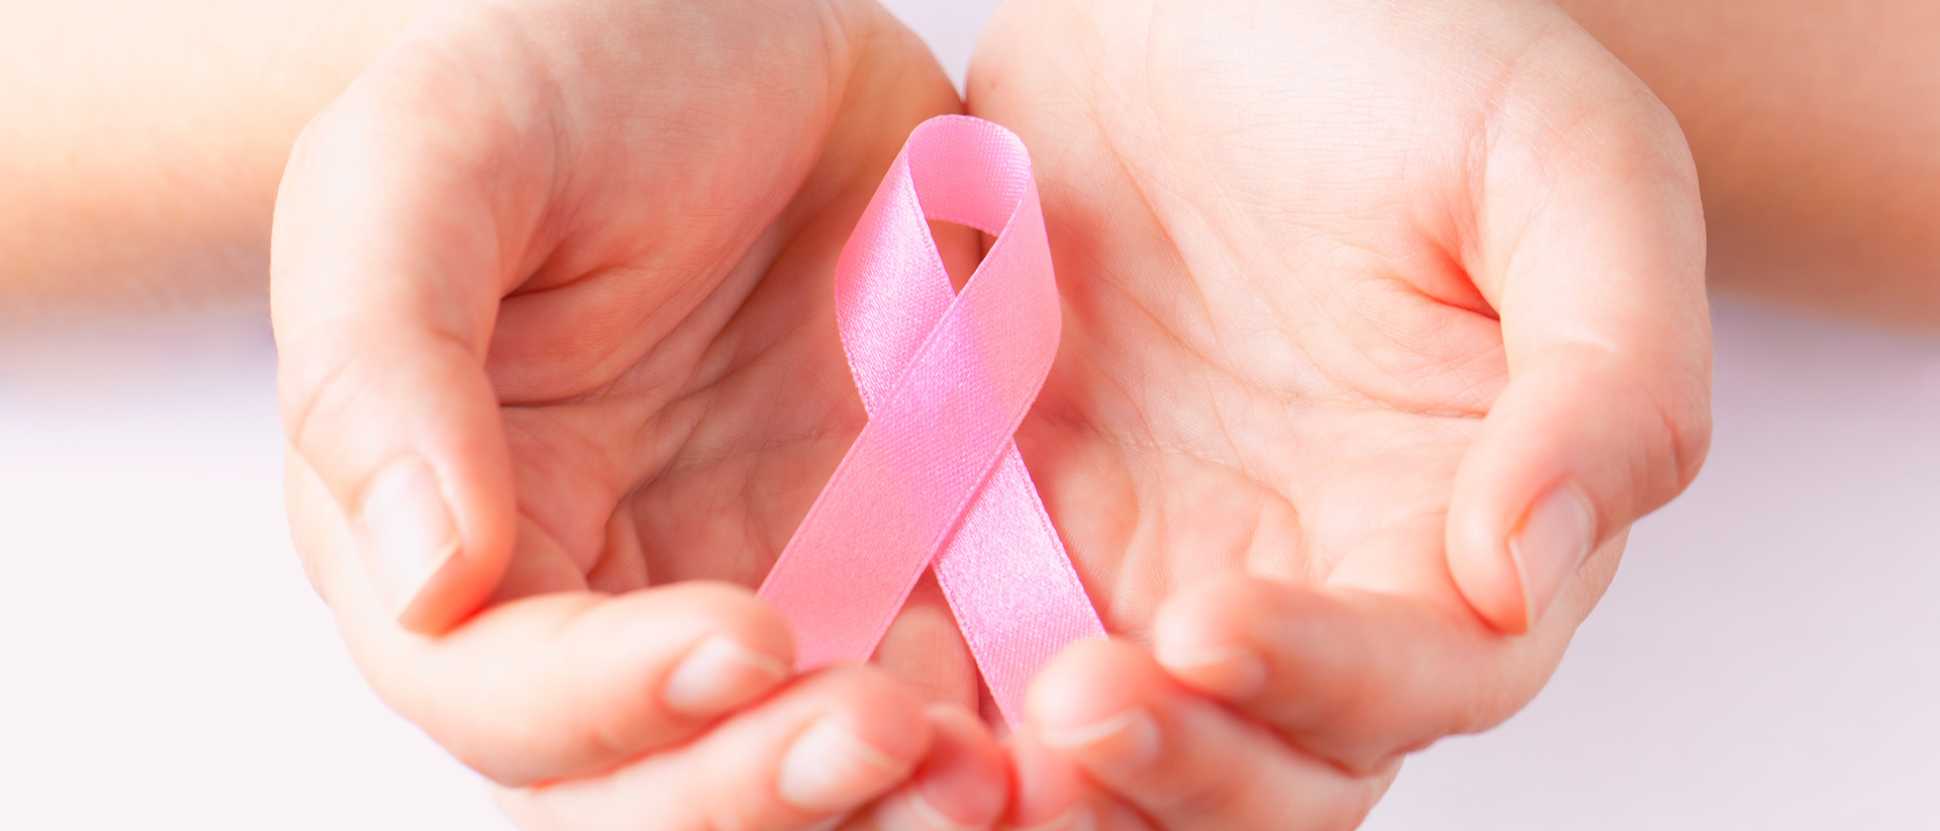 161208-Vitamin-D-levels-linked-to-better-breast-cancer-outcomesjpg